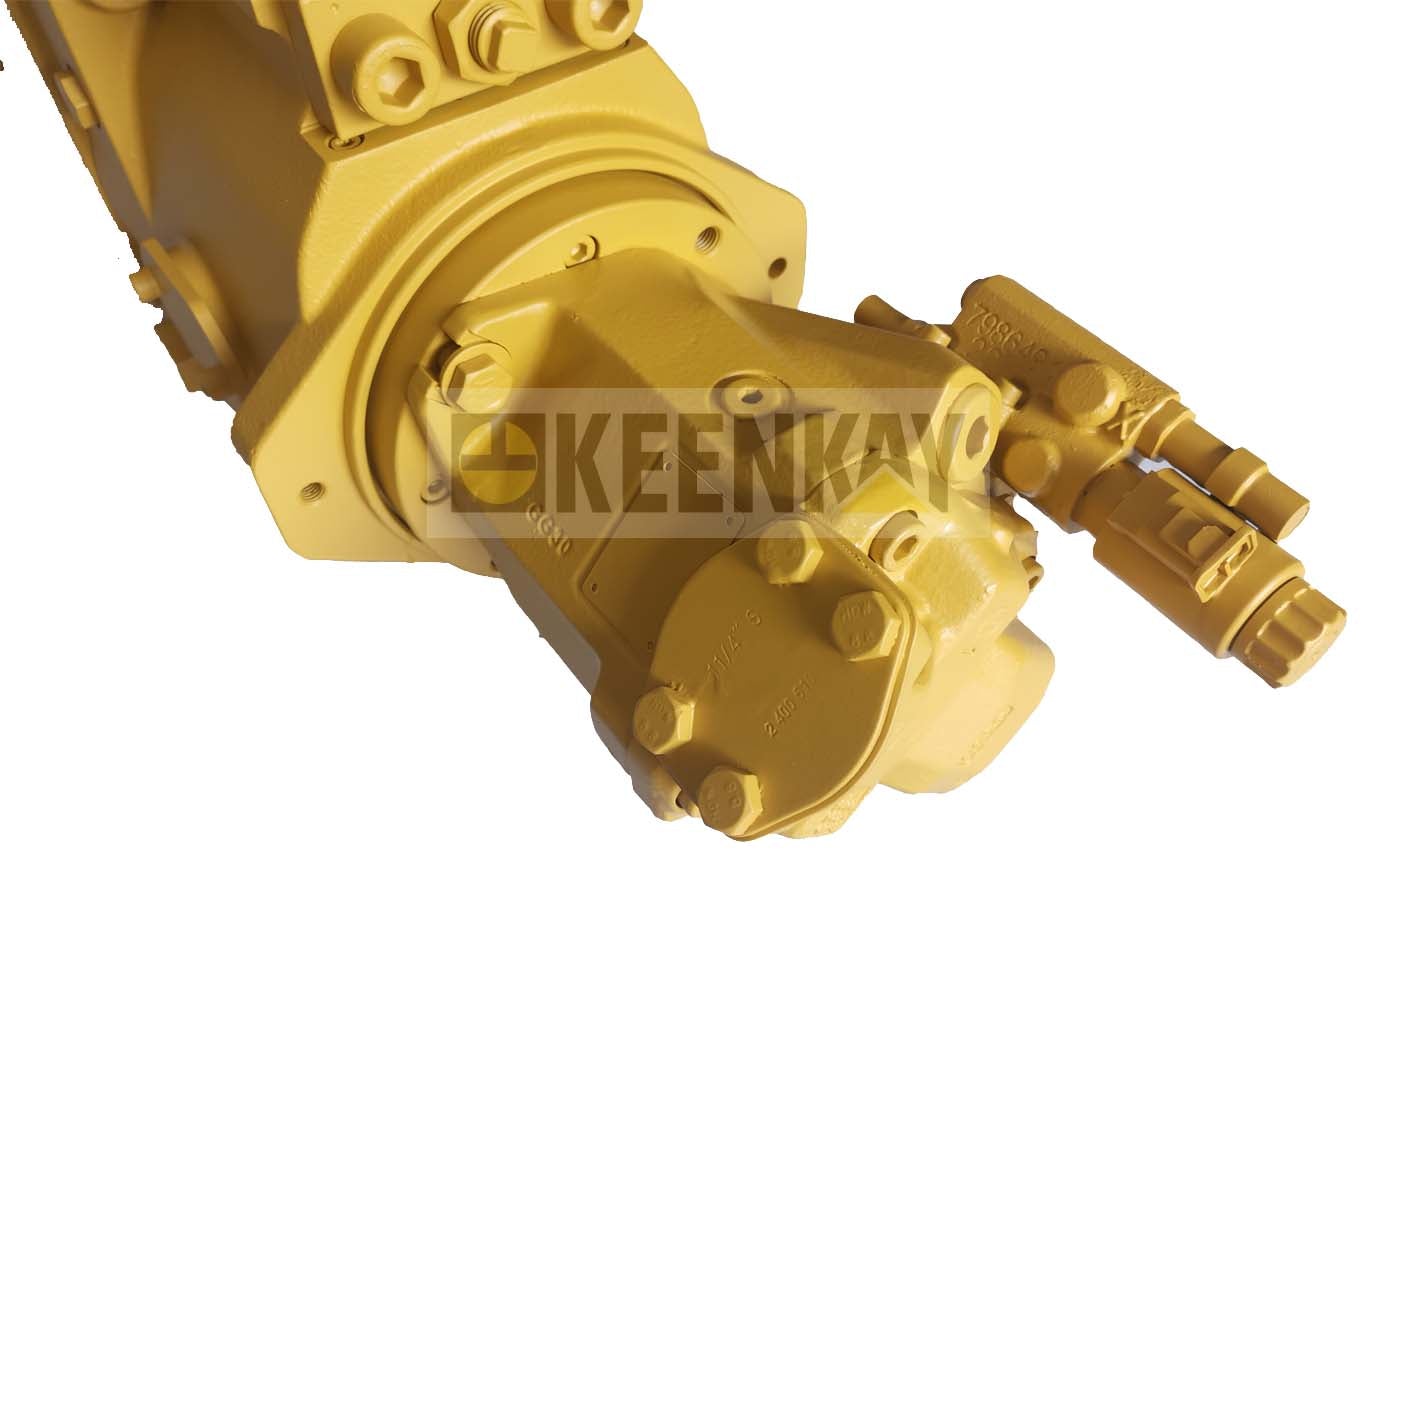 keenkay 550-4341 505-0529 524-0924 Genuine and Untapped Hydraulic Pump for CAT336GC CAT345GC Excavator